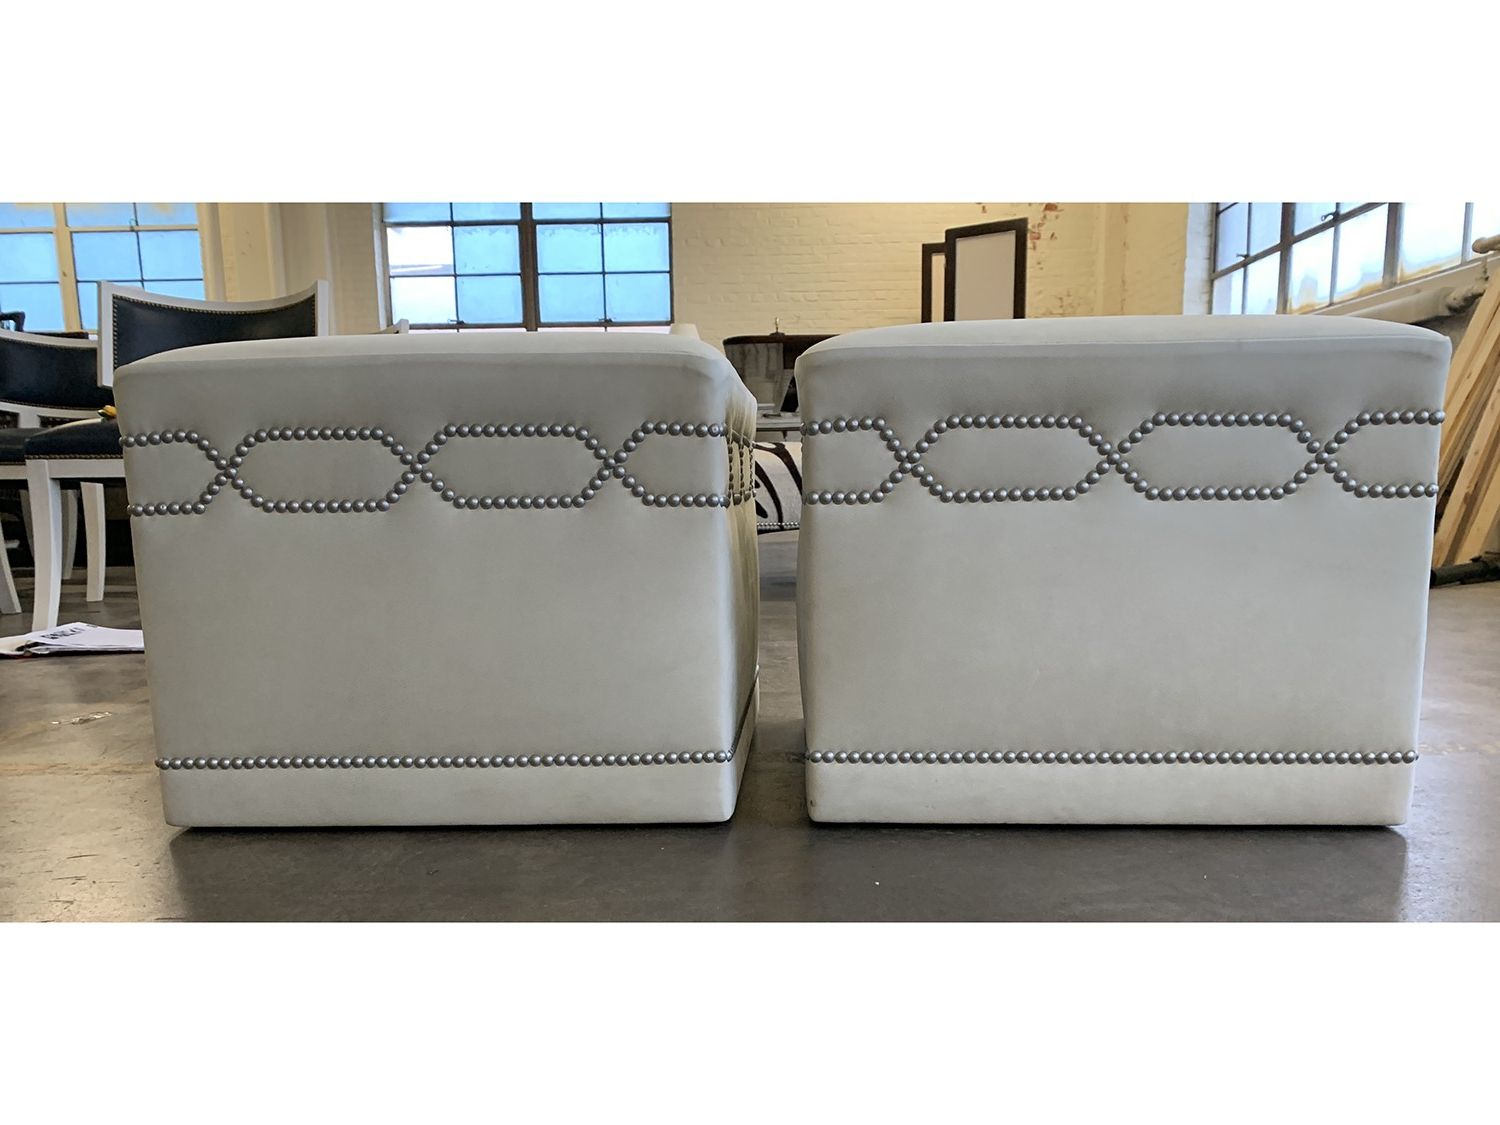 Light Blue And Gray Solid Cube Pouf Ottomans Within 2020 Light Grey Soft Leather Cube Ottoman With Nailhead, Pair • The Local Vault (View 2 of 10)